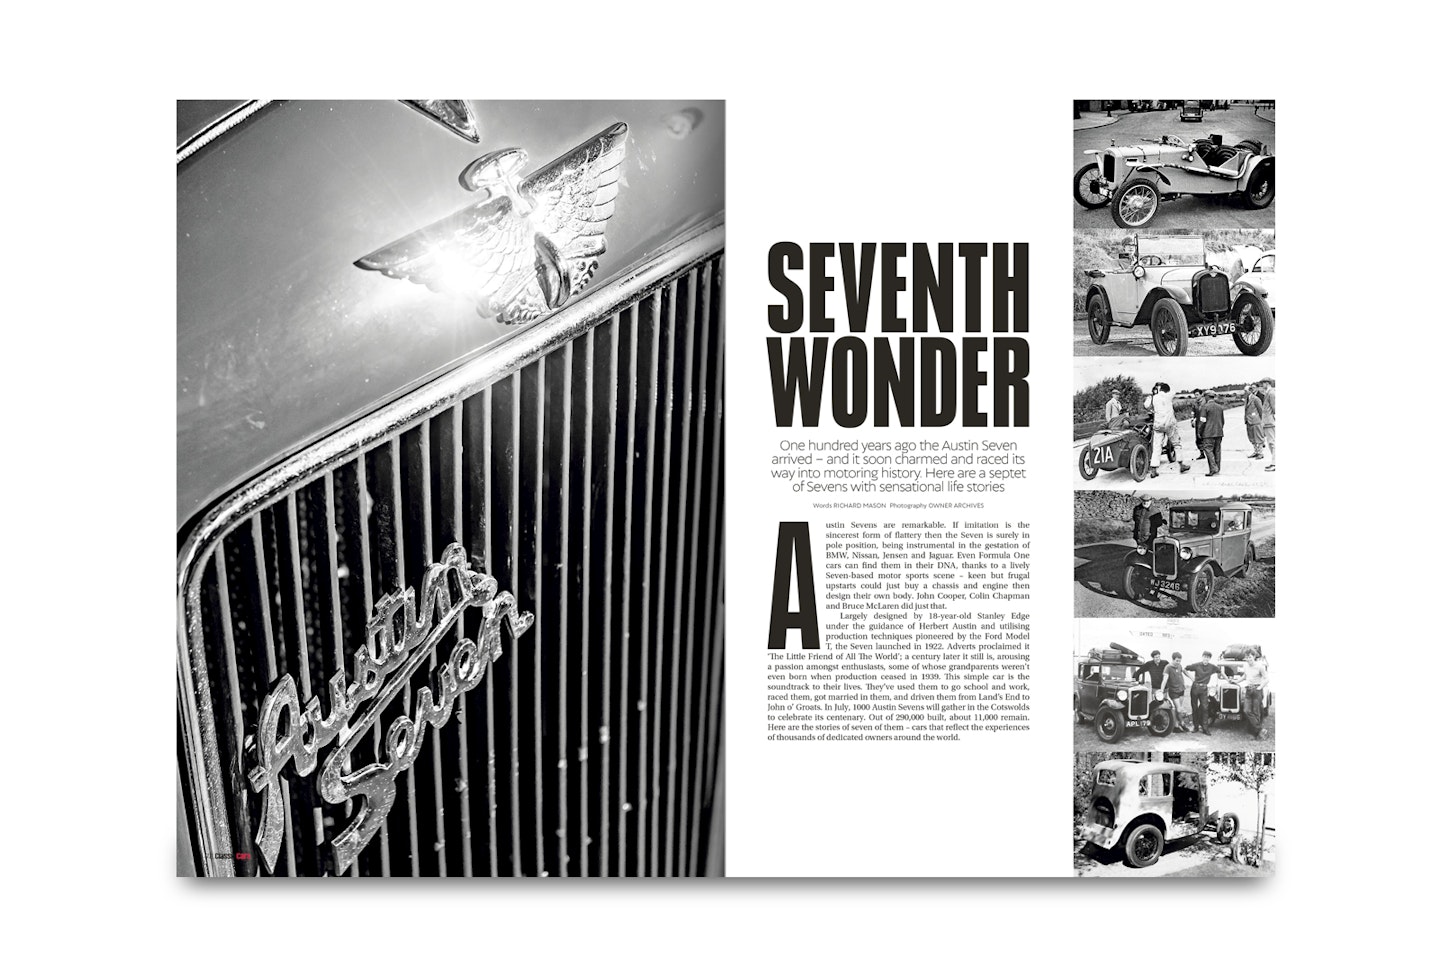 Special feature: Austin 7 at 100